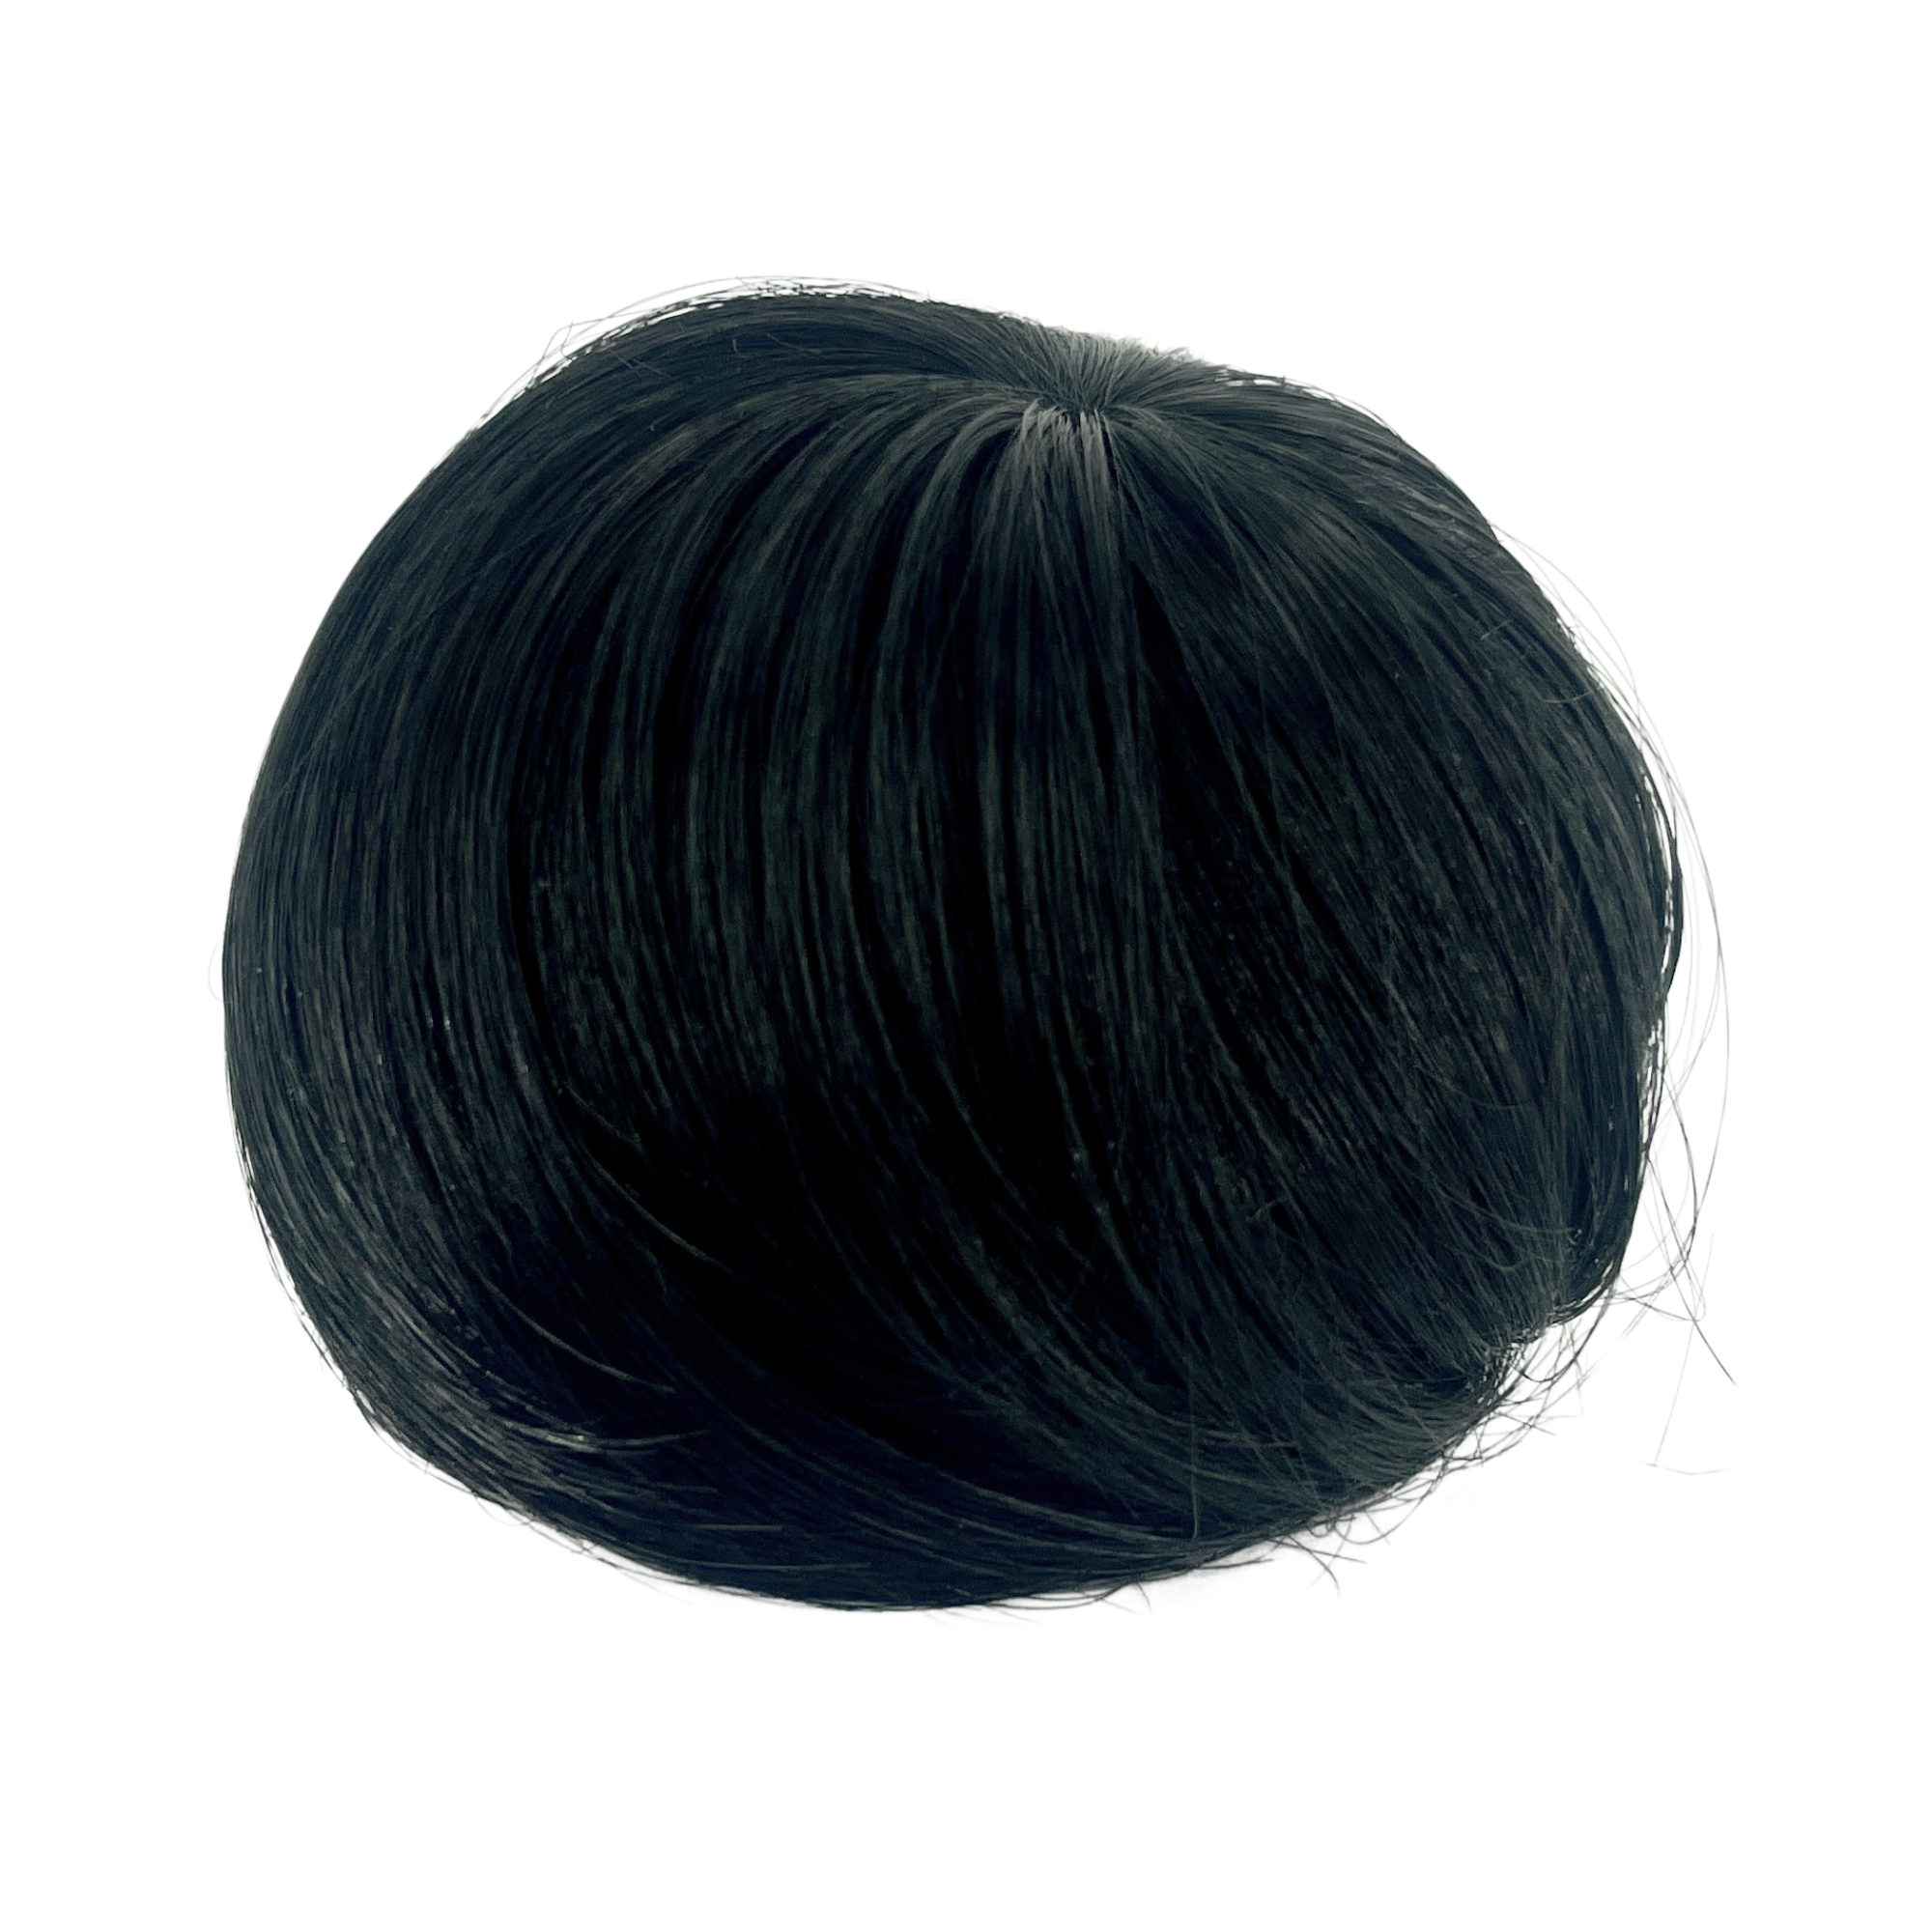 image of hair rehab london clip on bun hairpiece in shade jet black